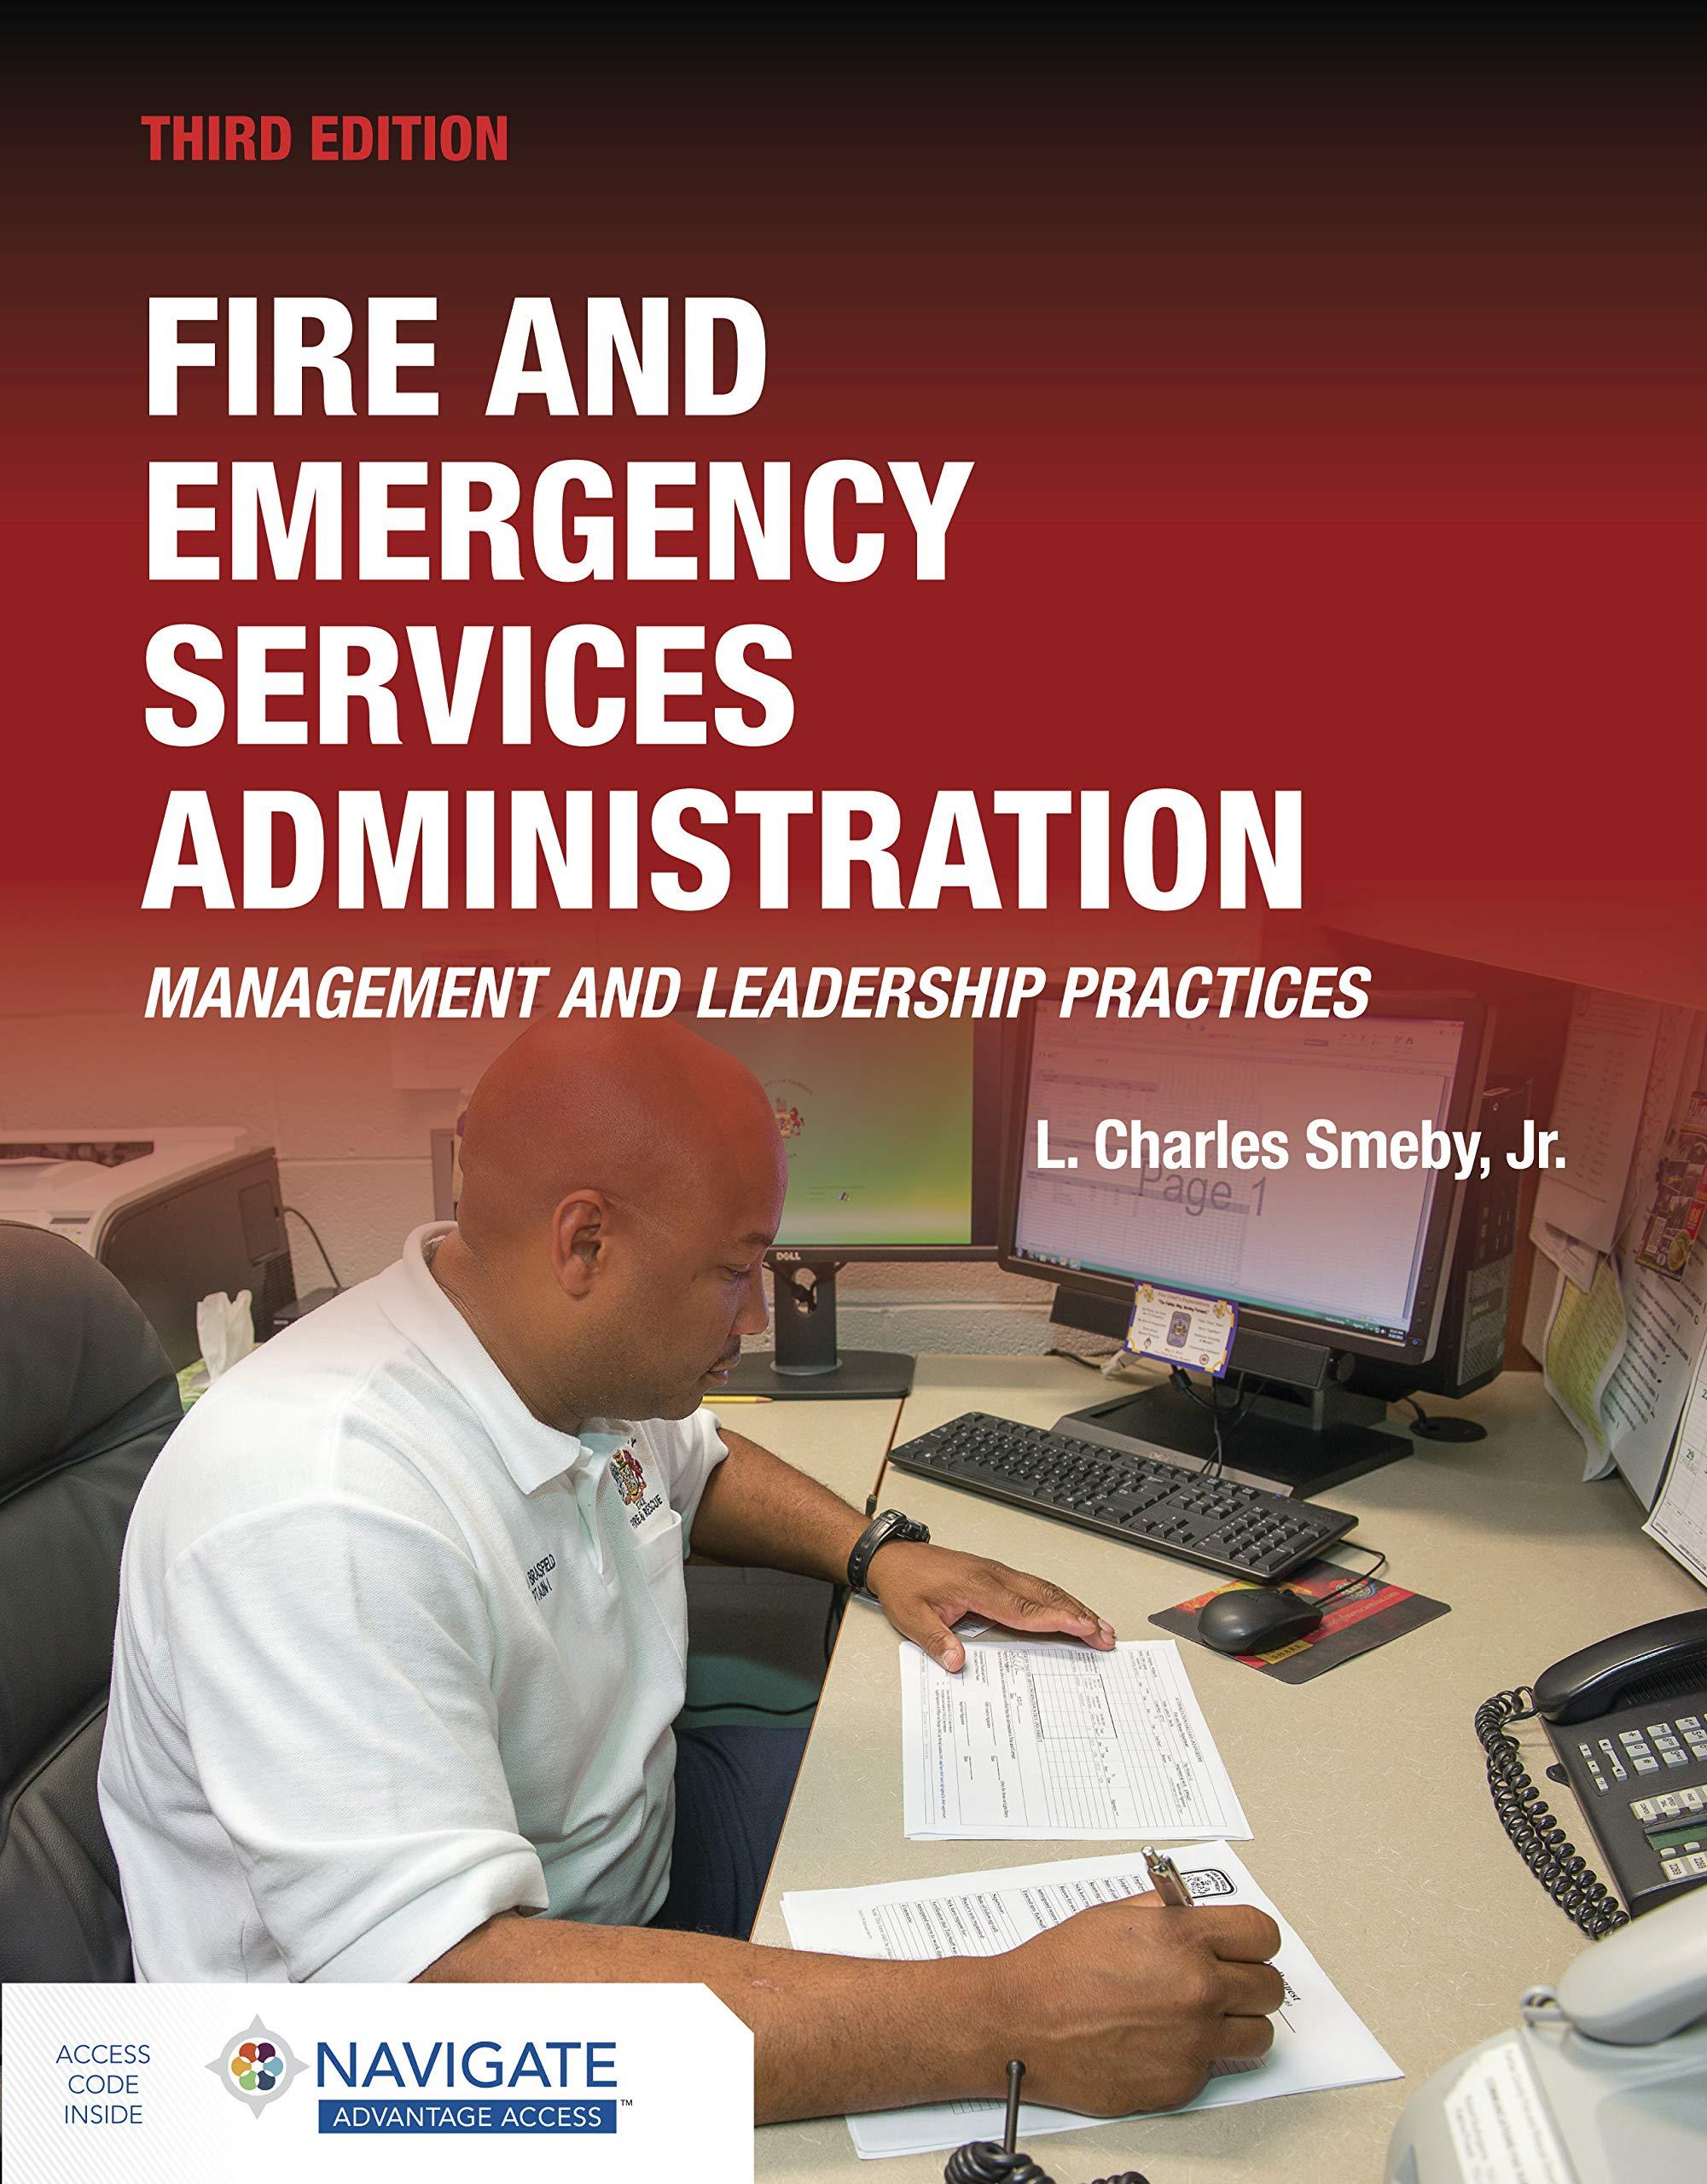 fire and emergency services administration management and leadership practices includes navigate advantage